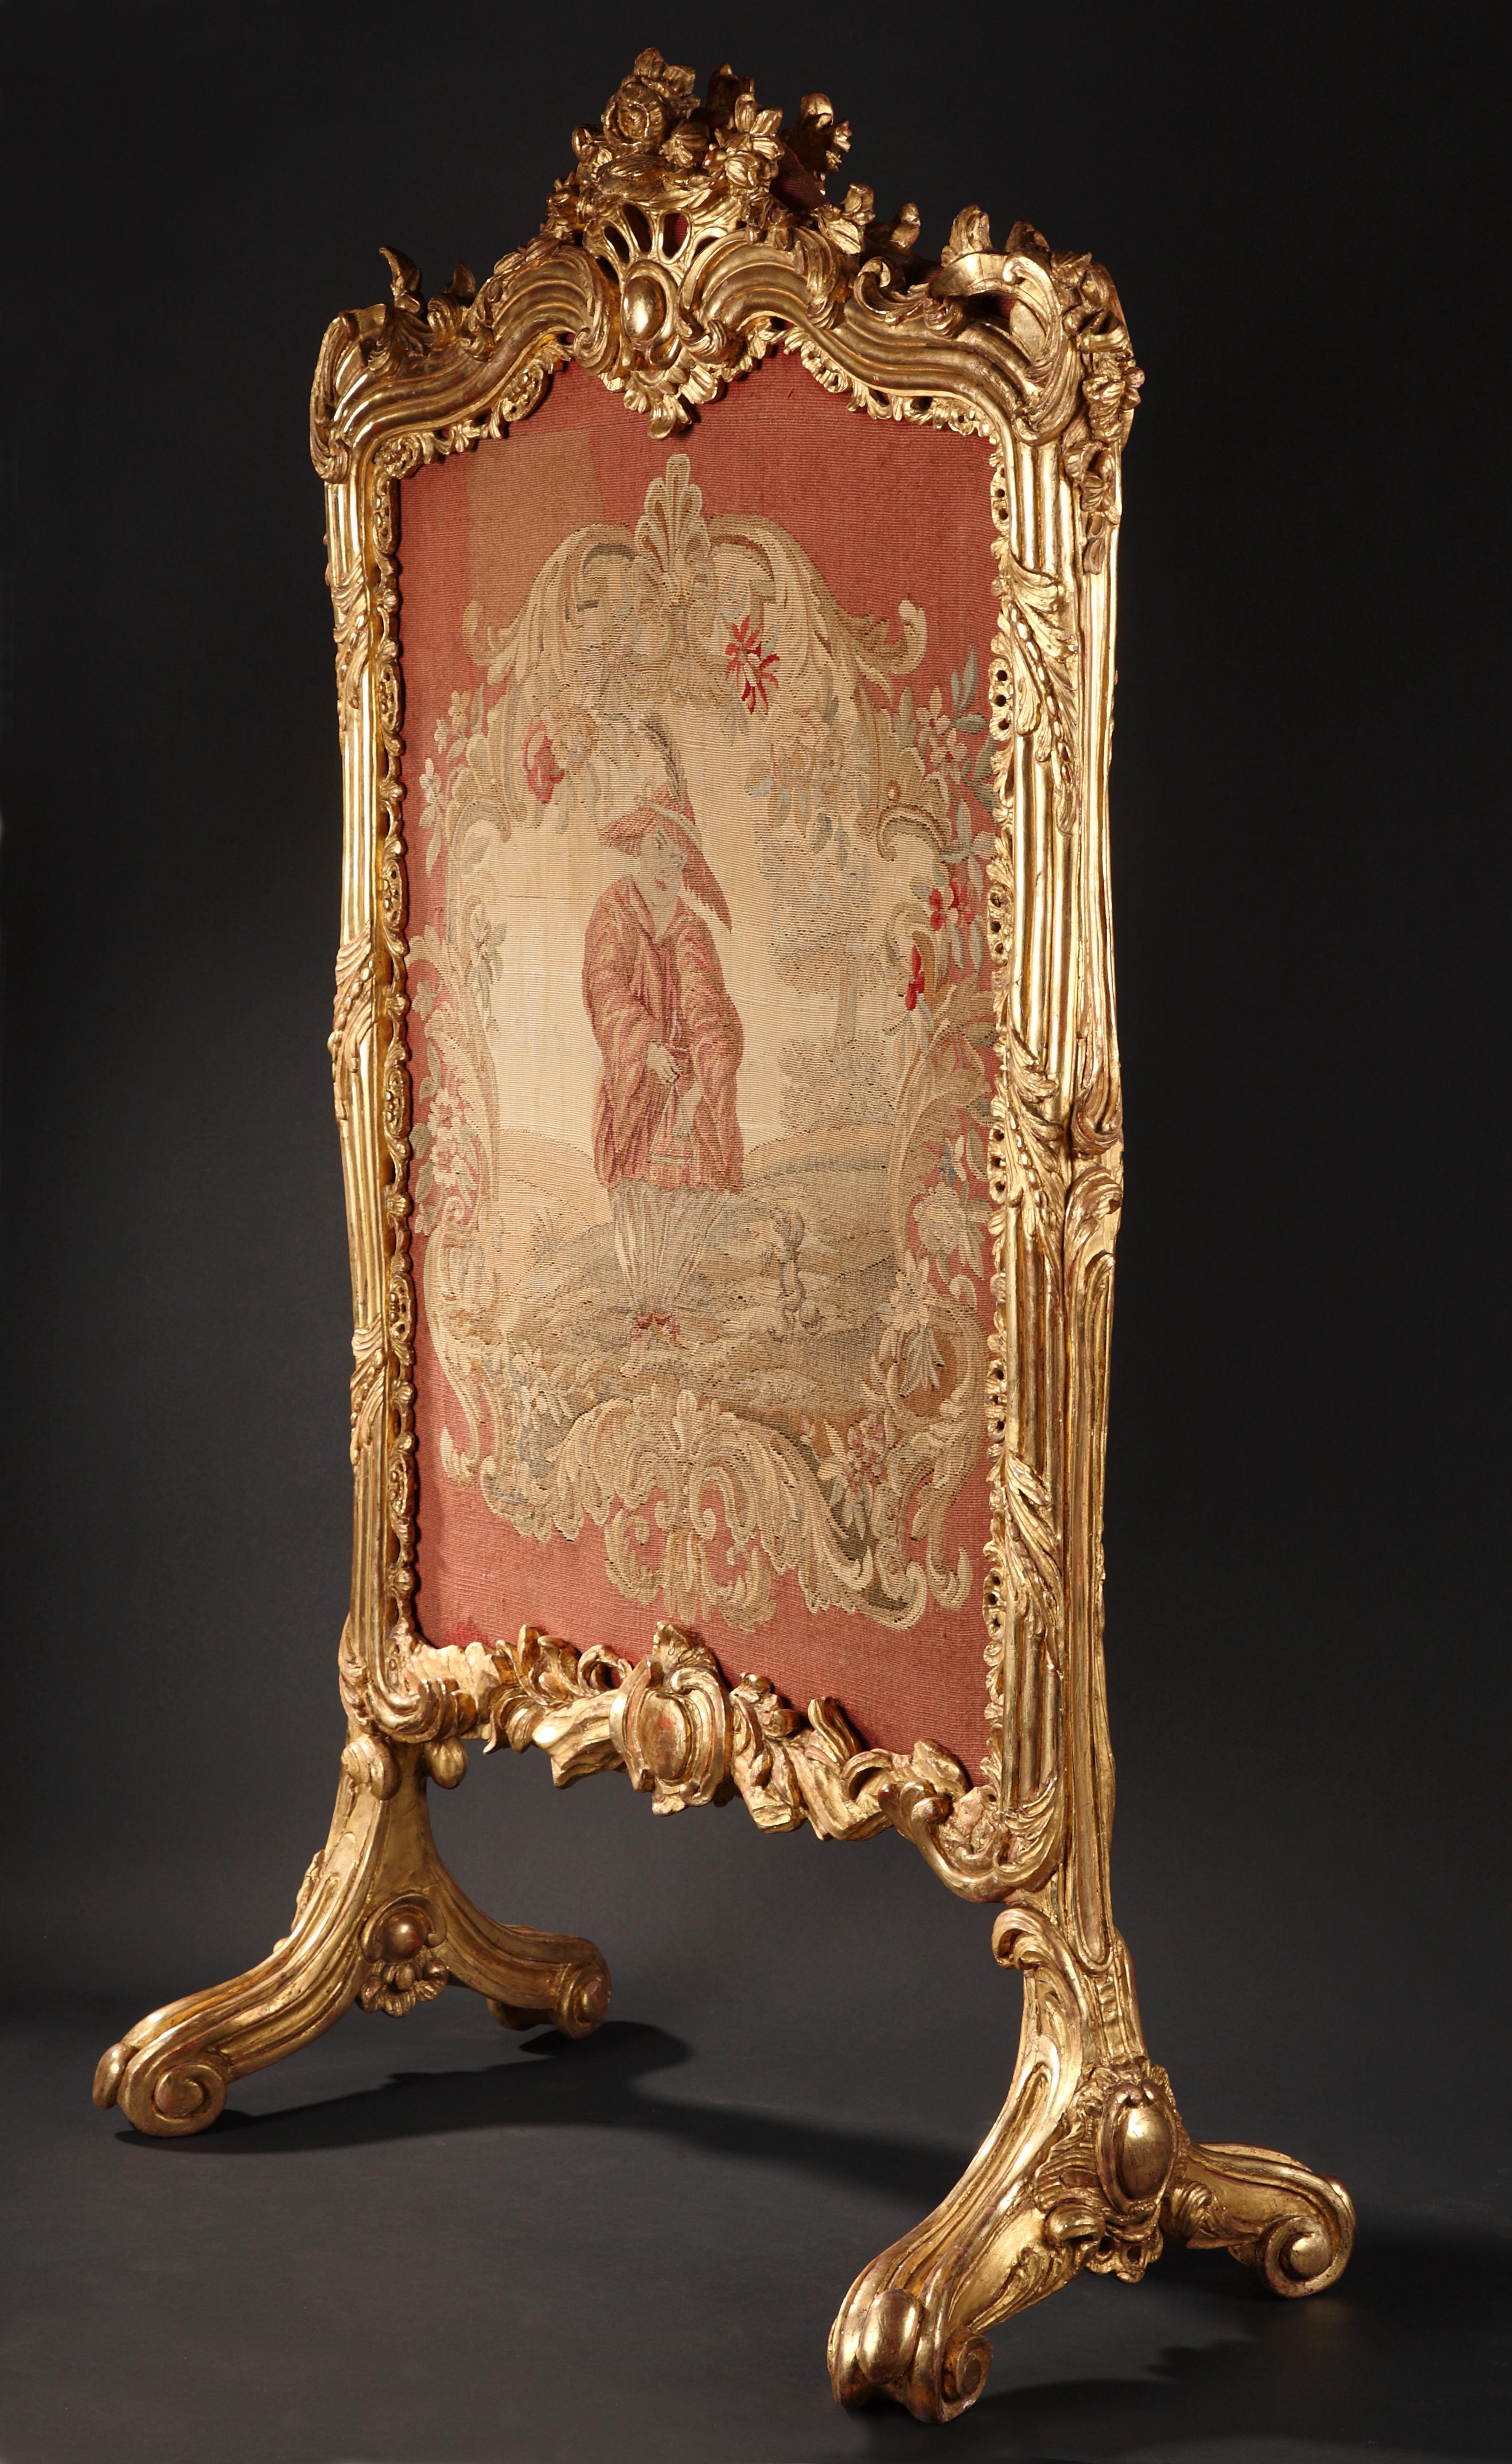 A very fine Louis XV style fire-screen beautifully carved in giltwood with acanthuses, flowers and scrolls, topped with birds, a quiver and a torch. A centred sliding panel made in Aubusson tapestry displays within a flowering frame a Chinese